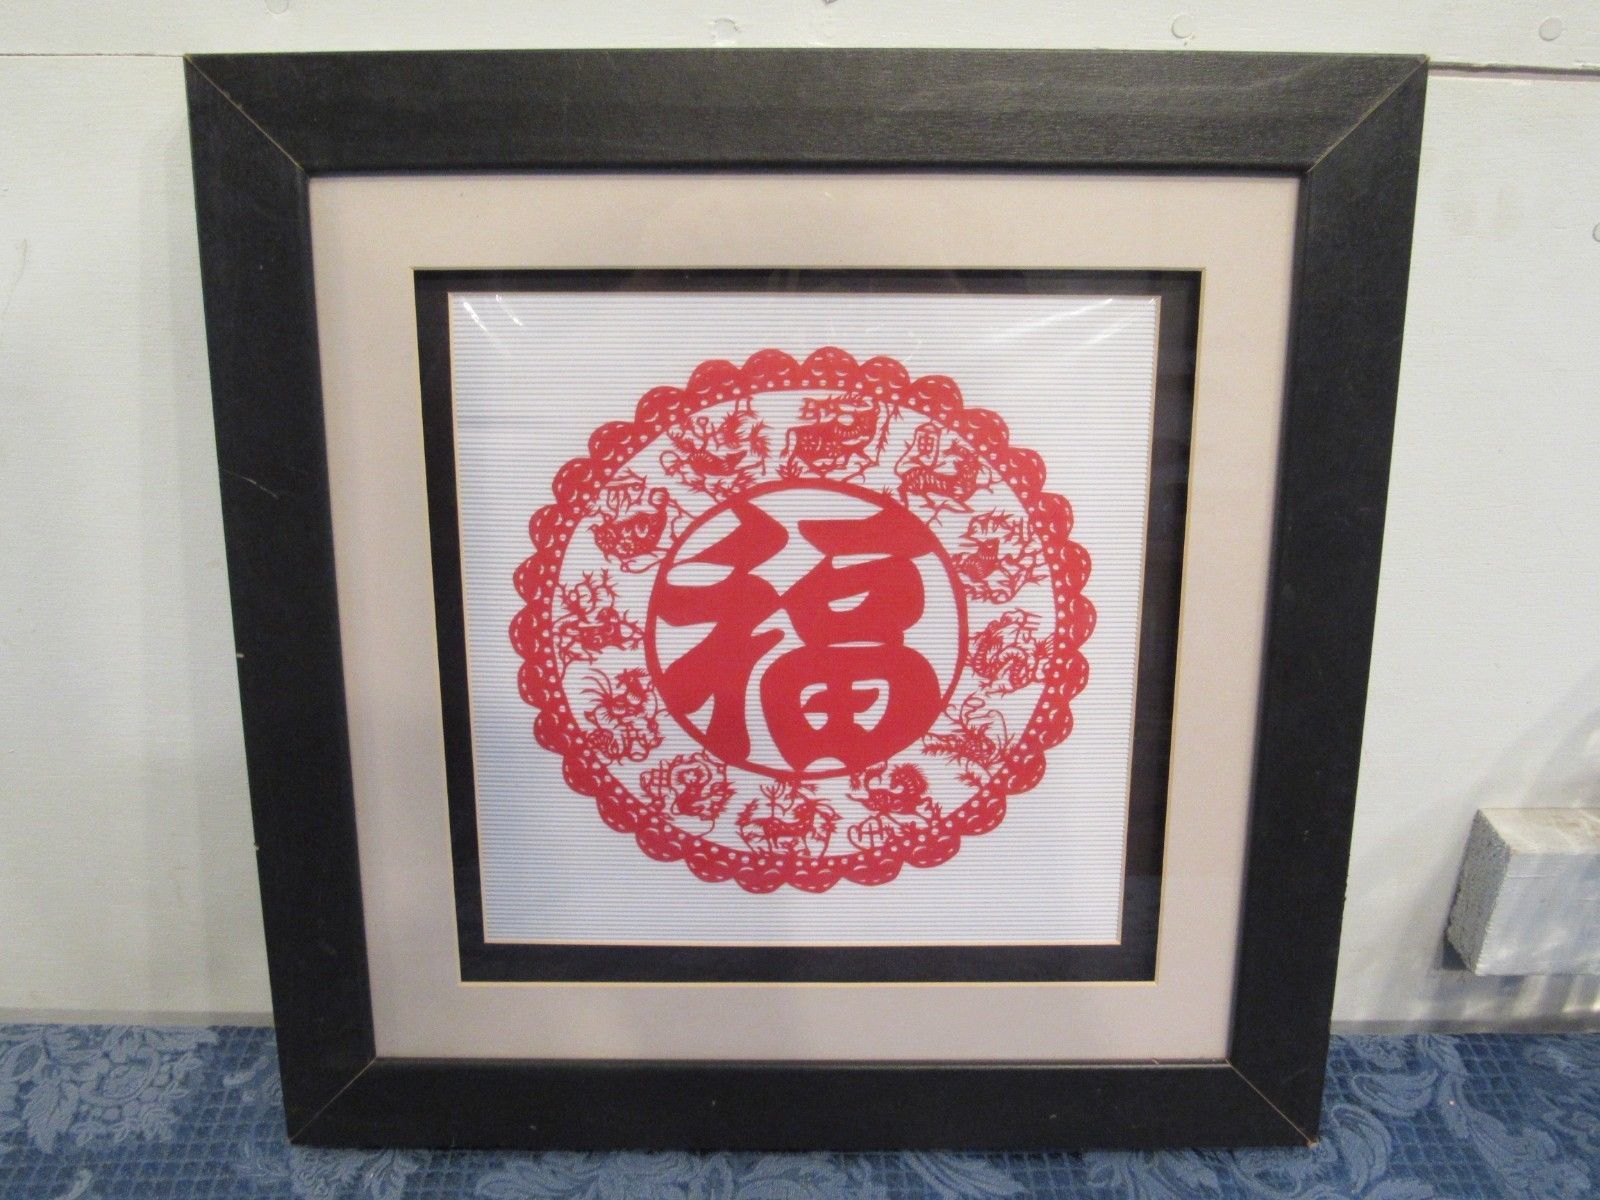 Chinese Zodiac Matted Framed Picture 19" by 19" - $38.70